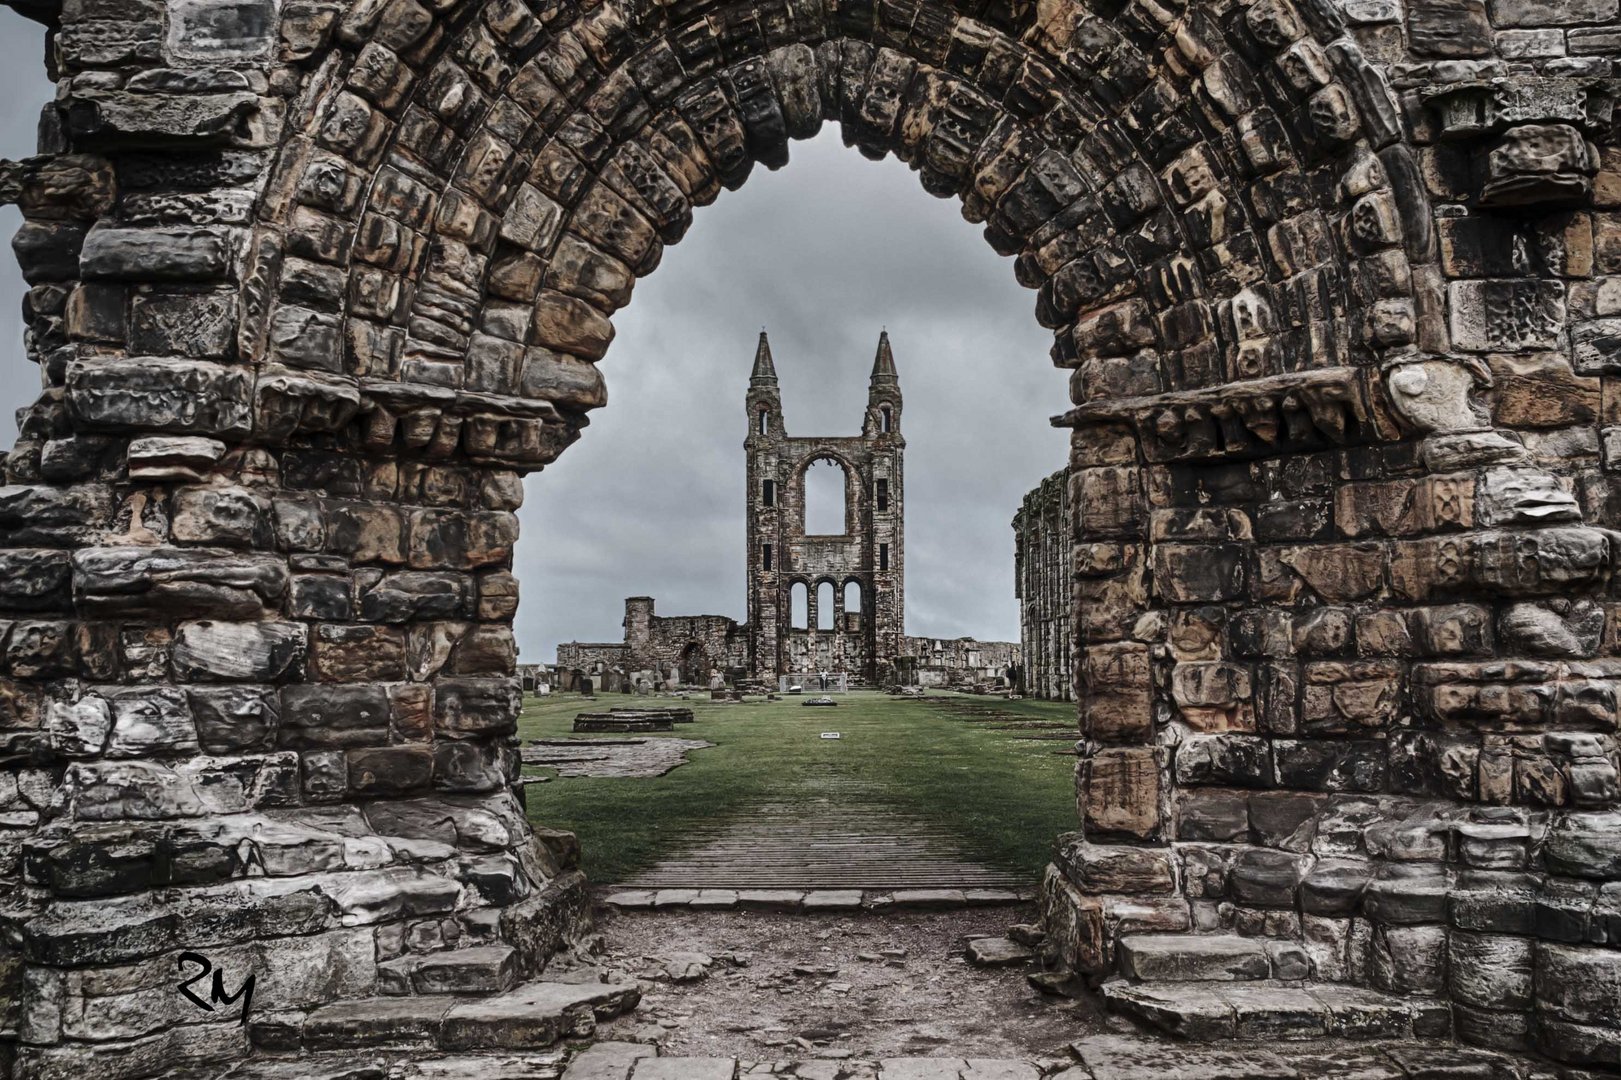 St. Andrews Cathedral II